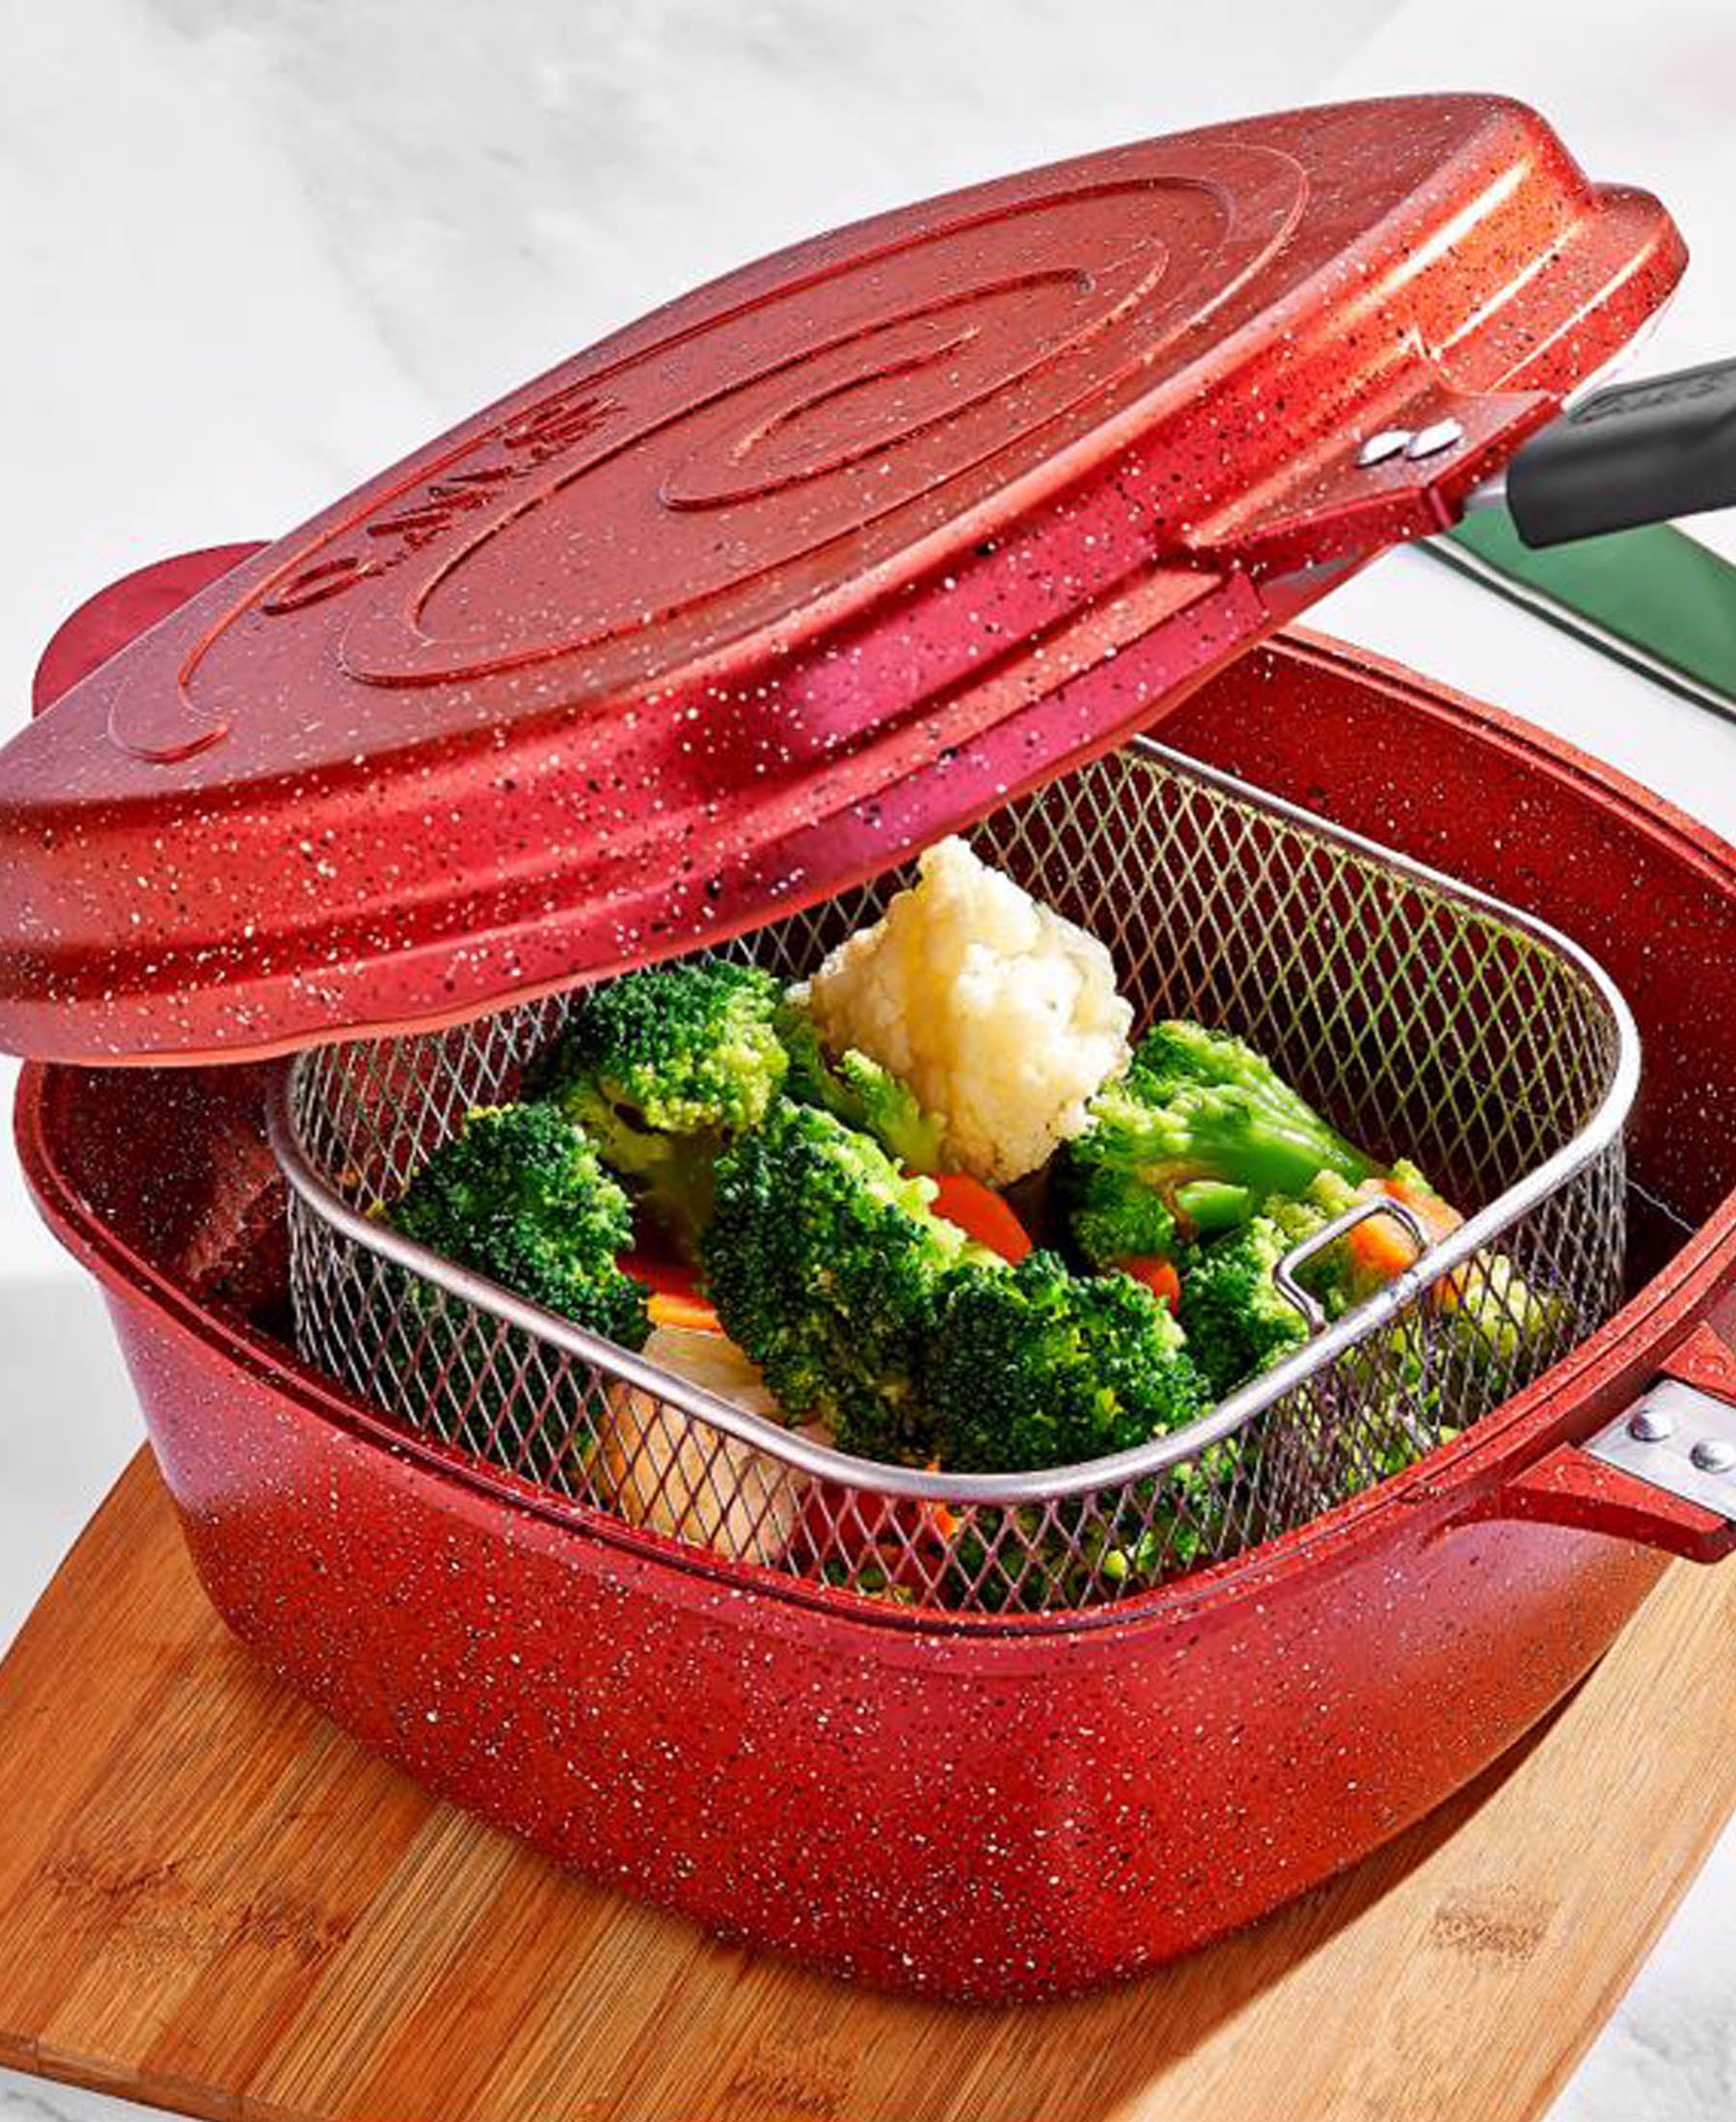 OMS 7 Piece Non Stick Granite Cookware Set - Red Or Grey